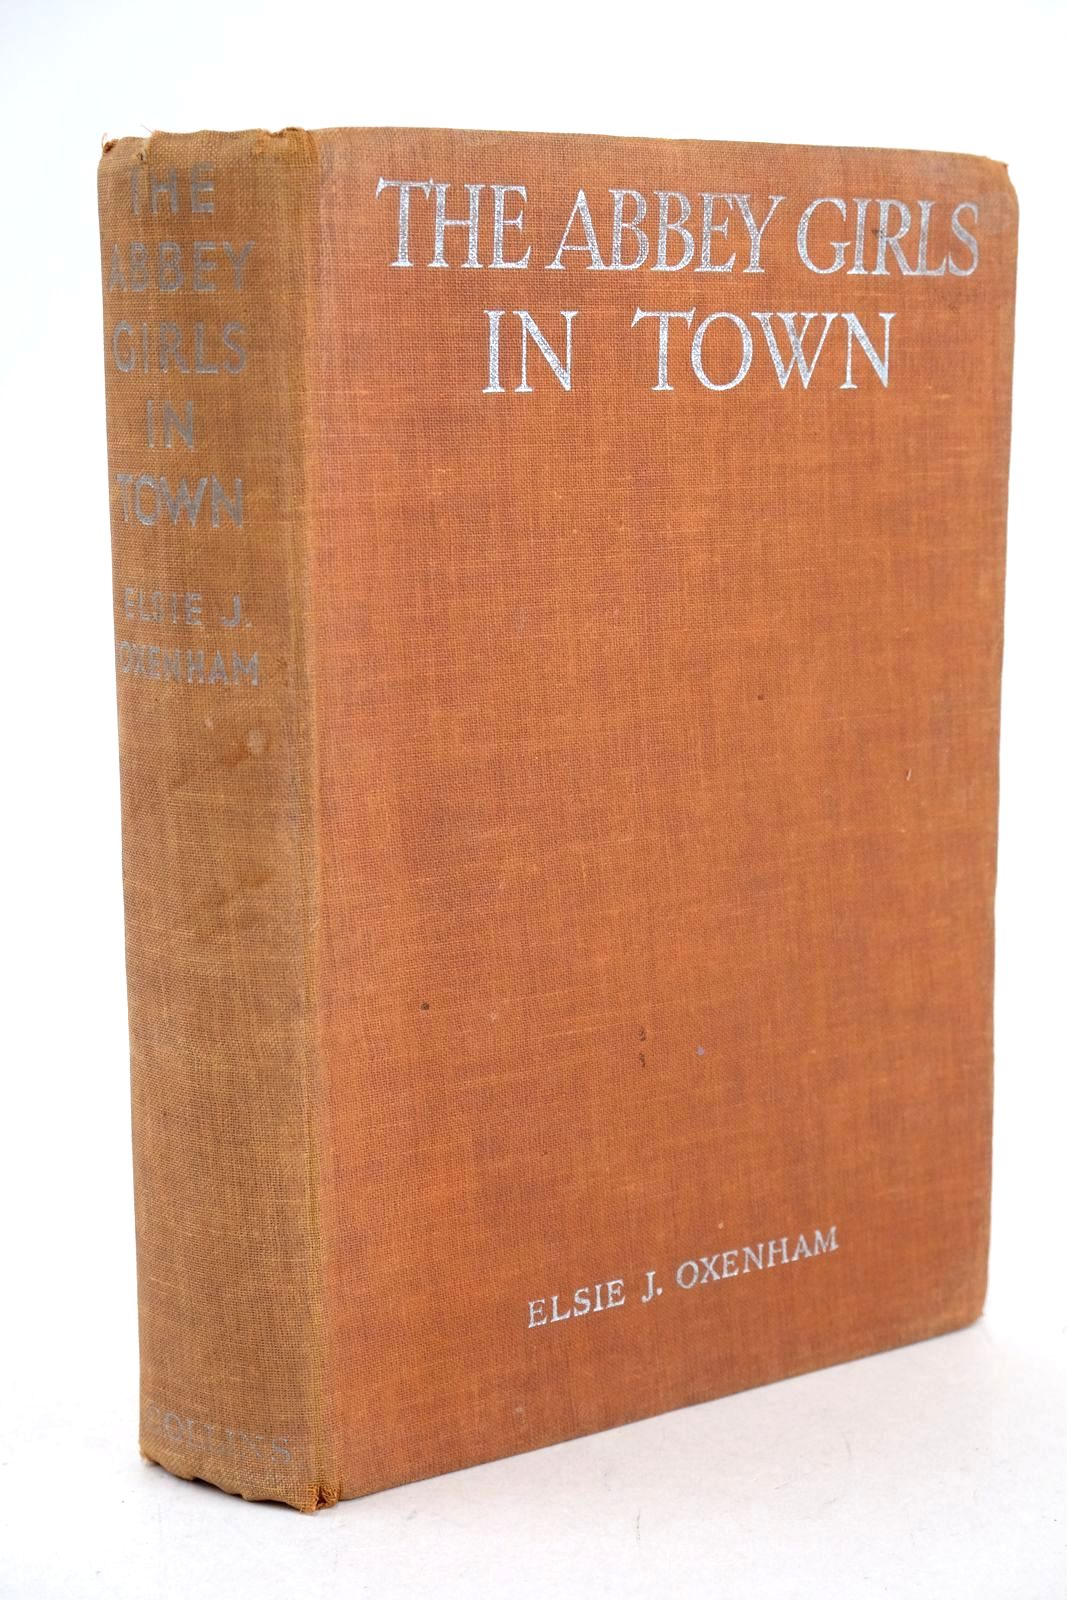 Photo of THE ABBEY GIRLS IN TOWN written by Oxenham, Elsie J. published by Collins (STOCK CODE: 1326855)  for sale by Stella & Rose's Books